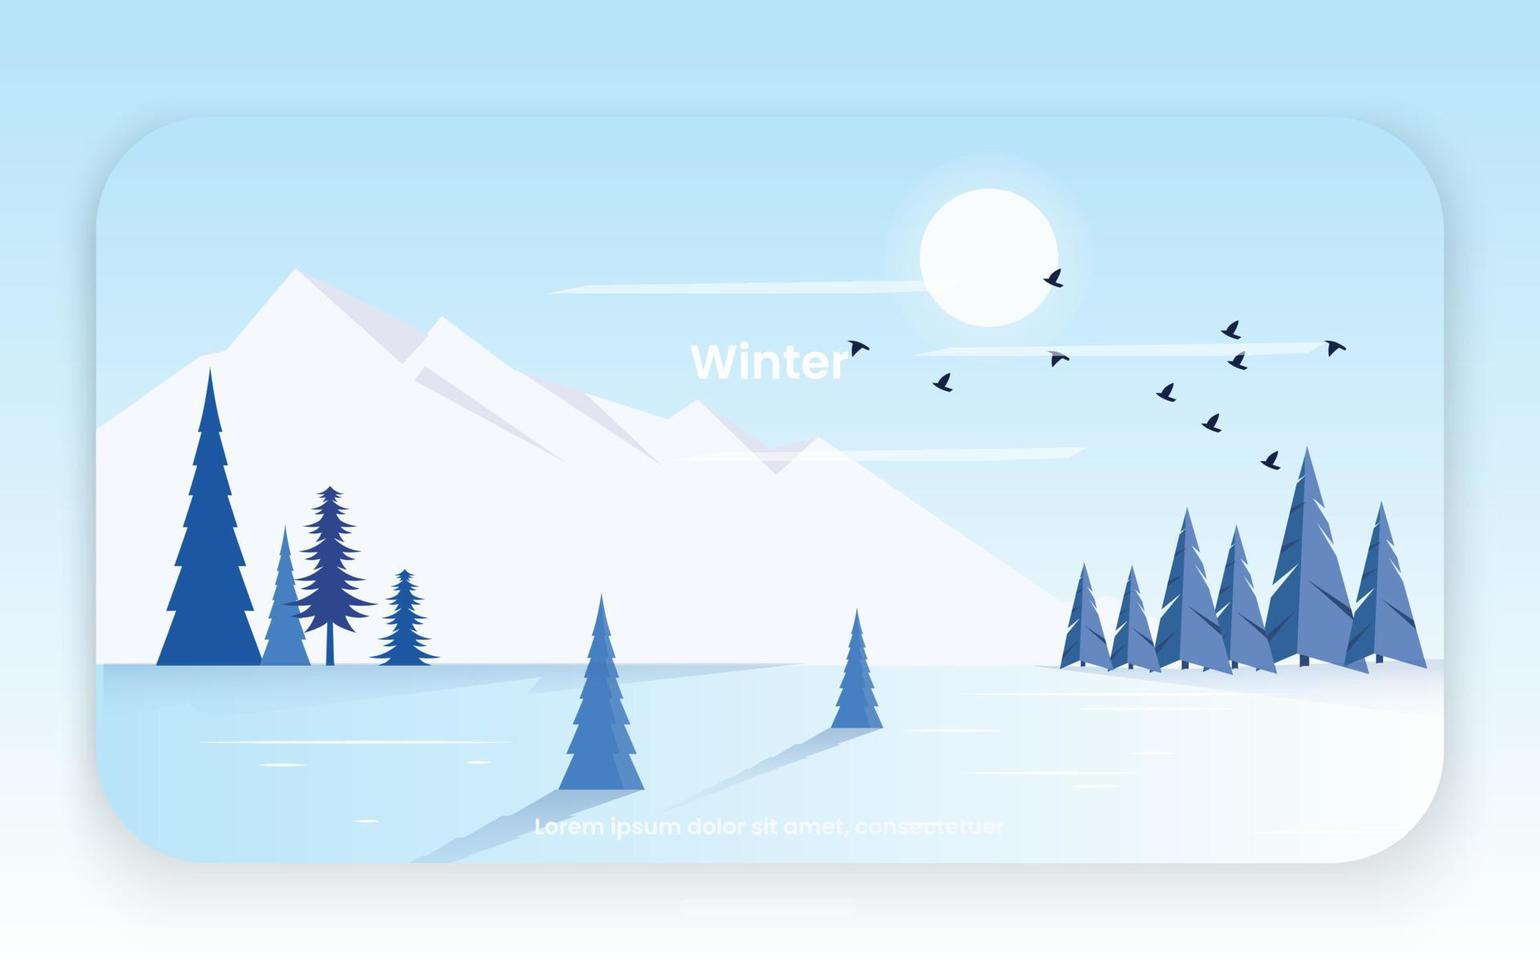 Winter landscape in cold mountain area.vector illustration of winter day landscape vector